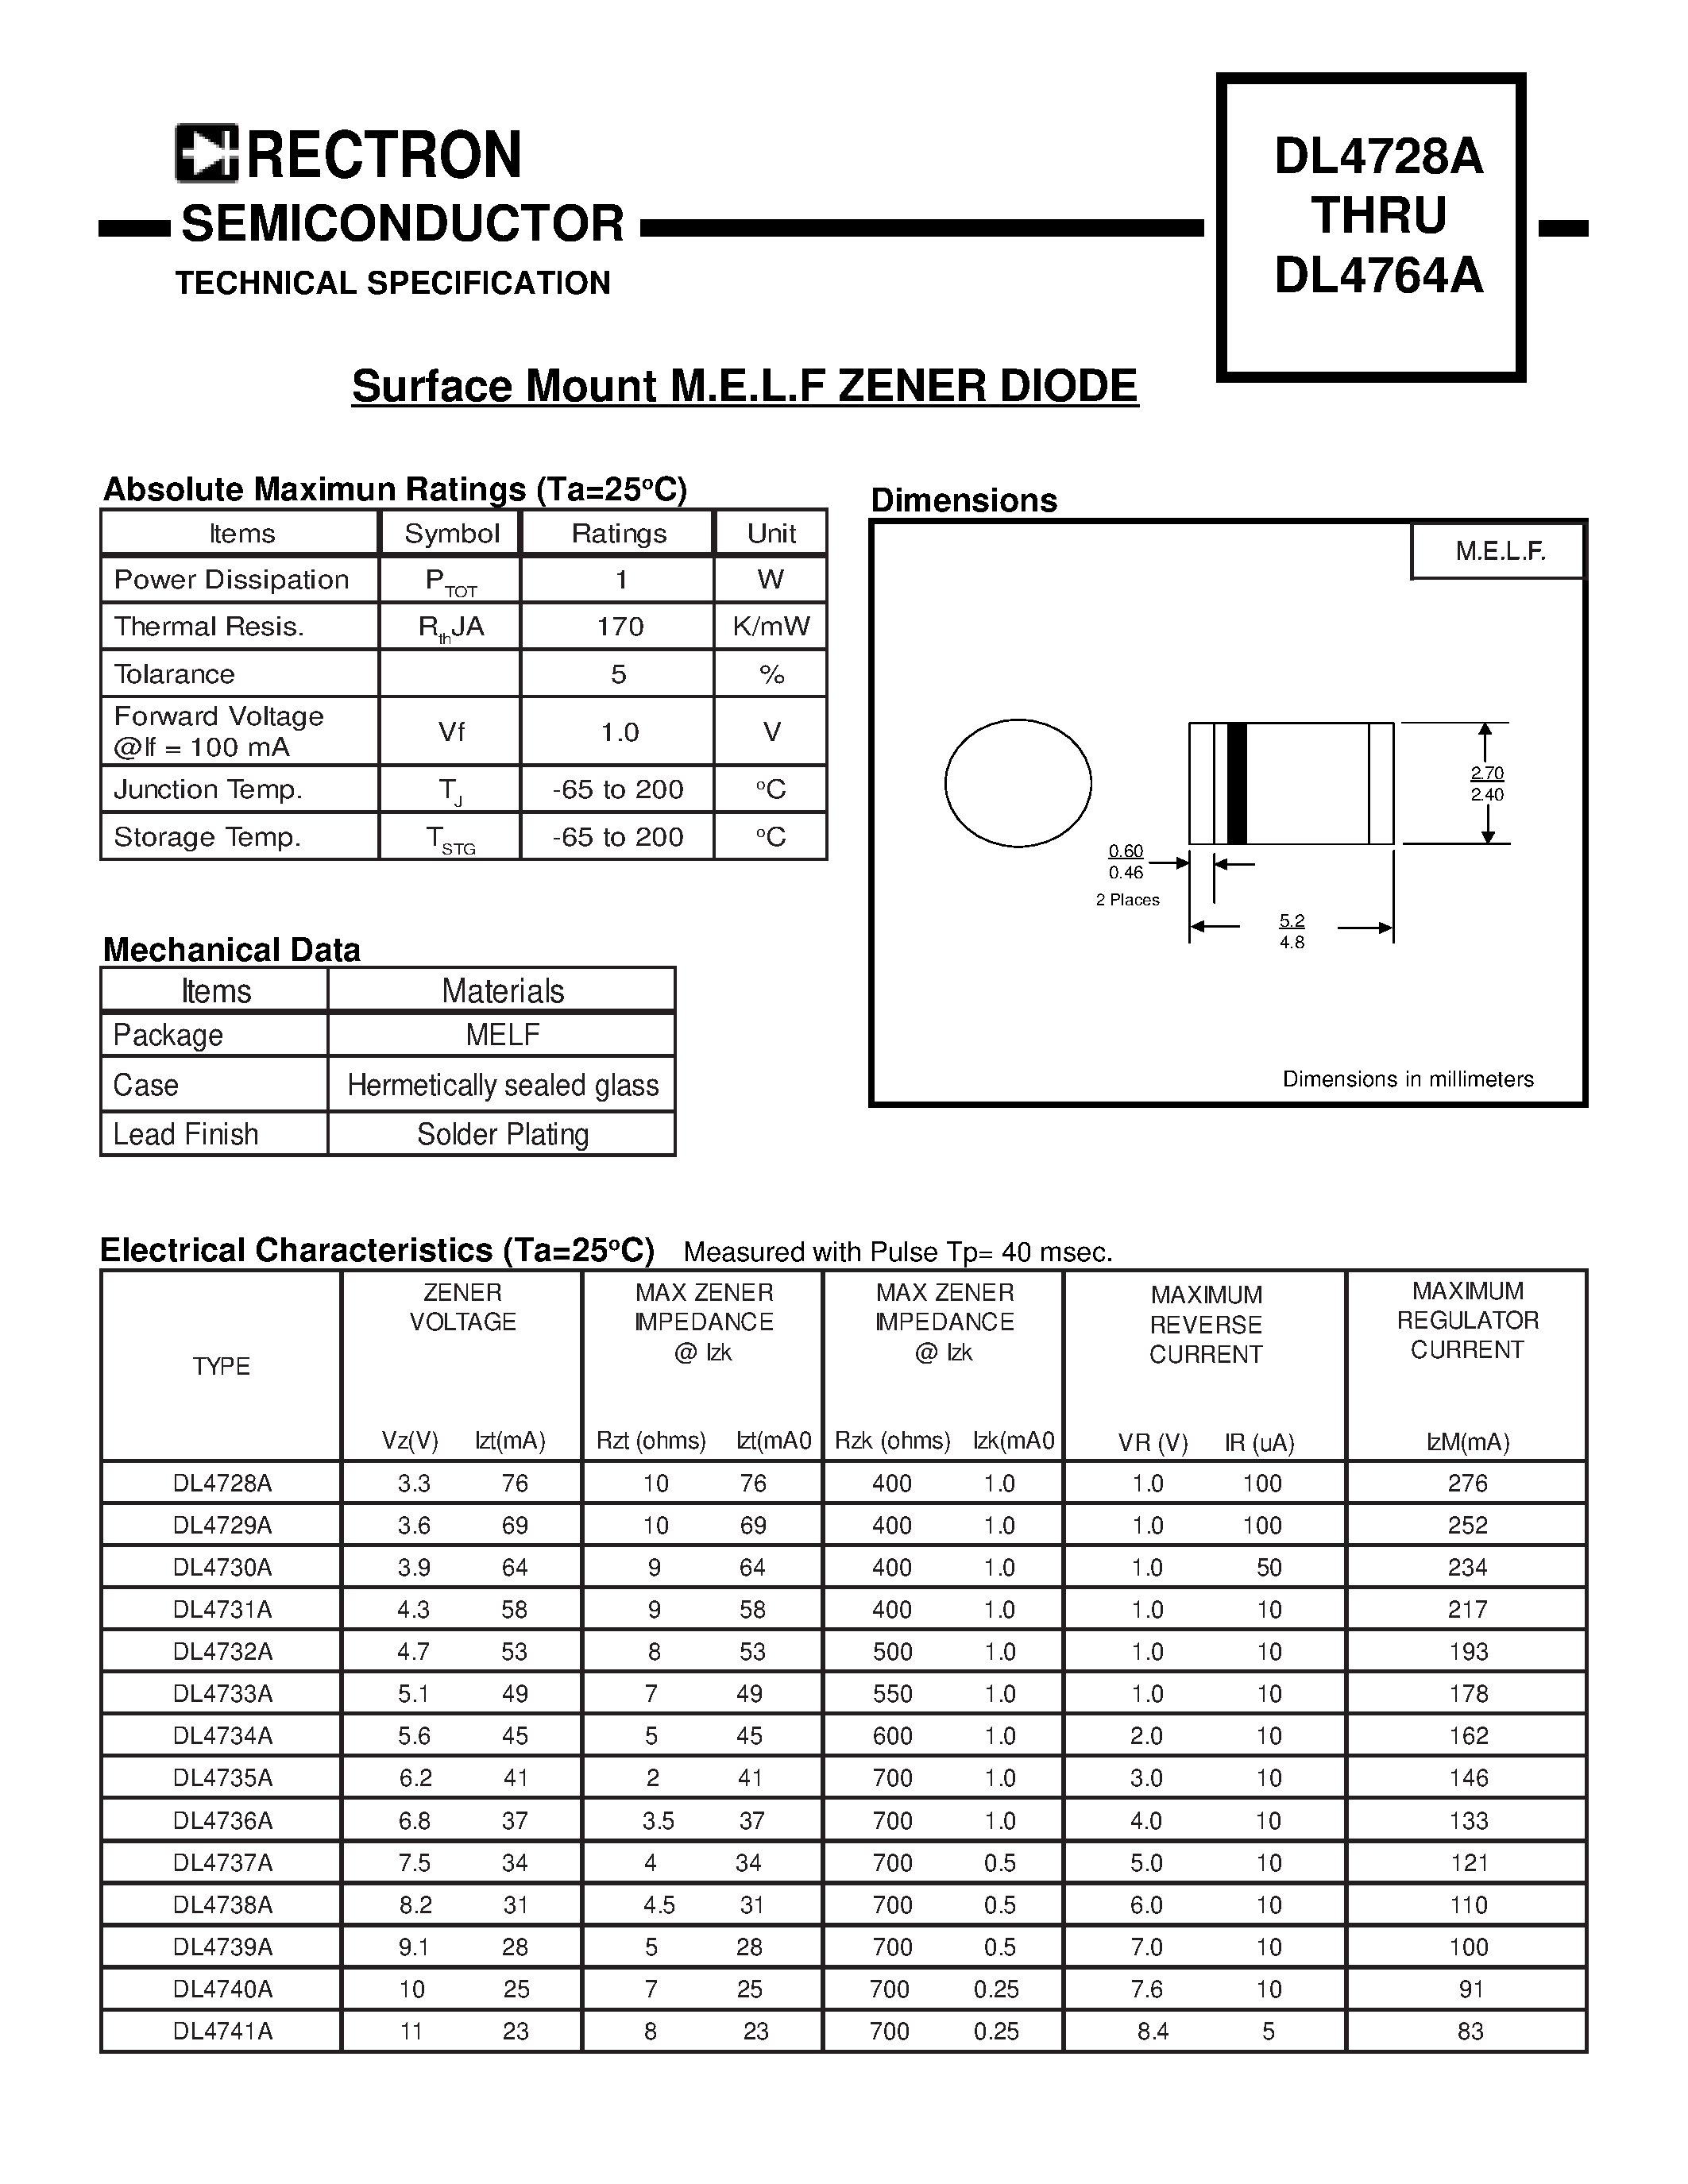 Datasheet DL4731A - Surface Mount M.E.L.F ZENER DIODE page 1